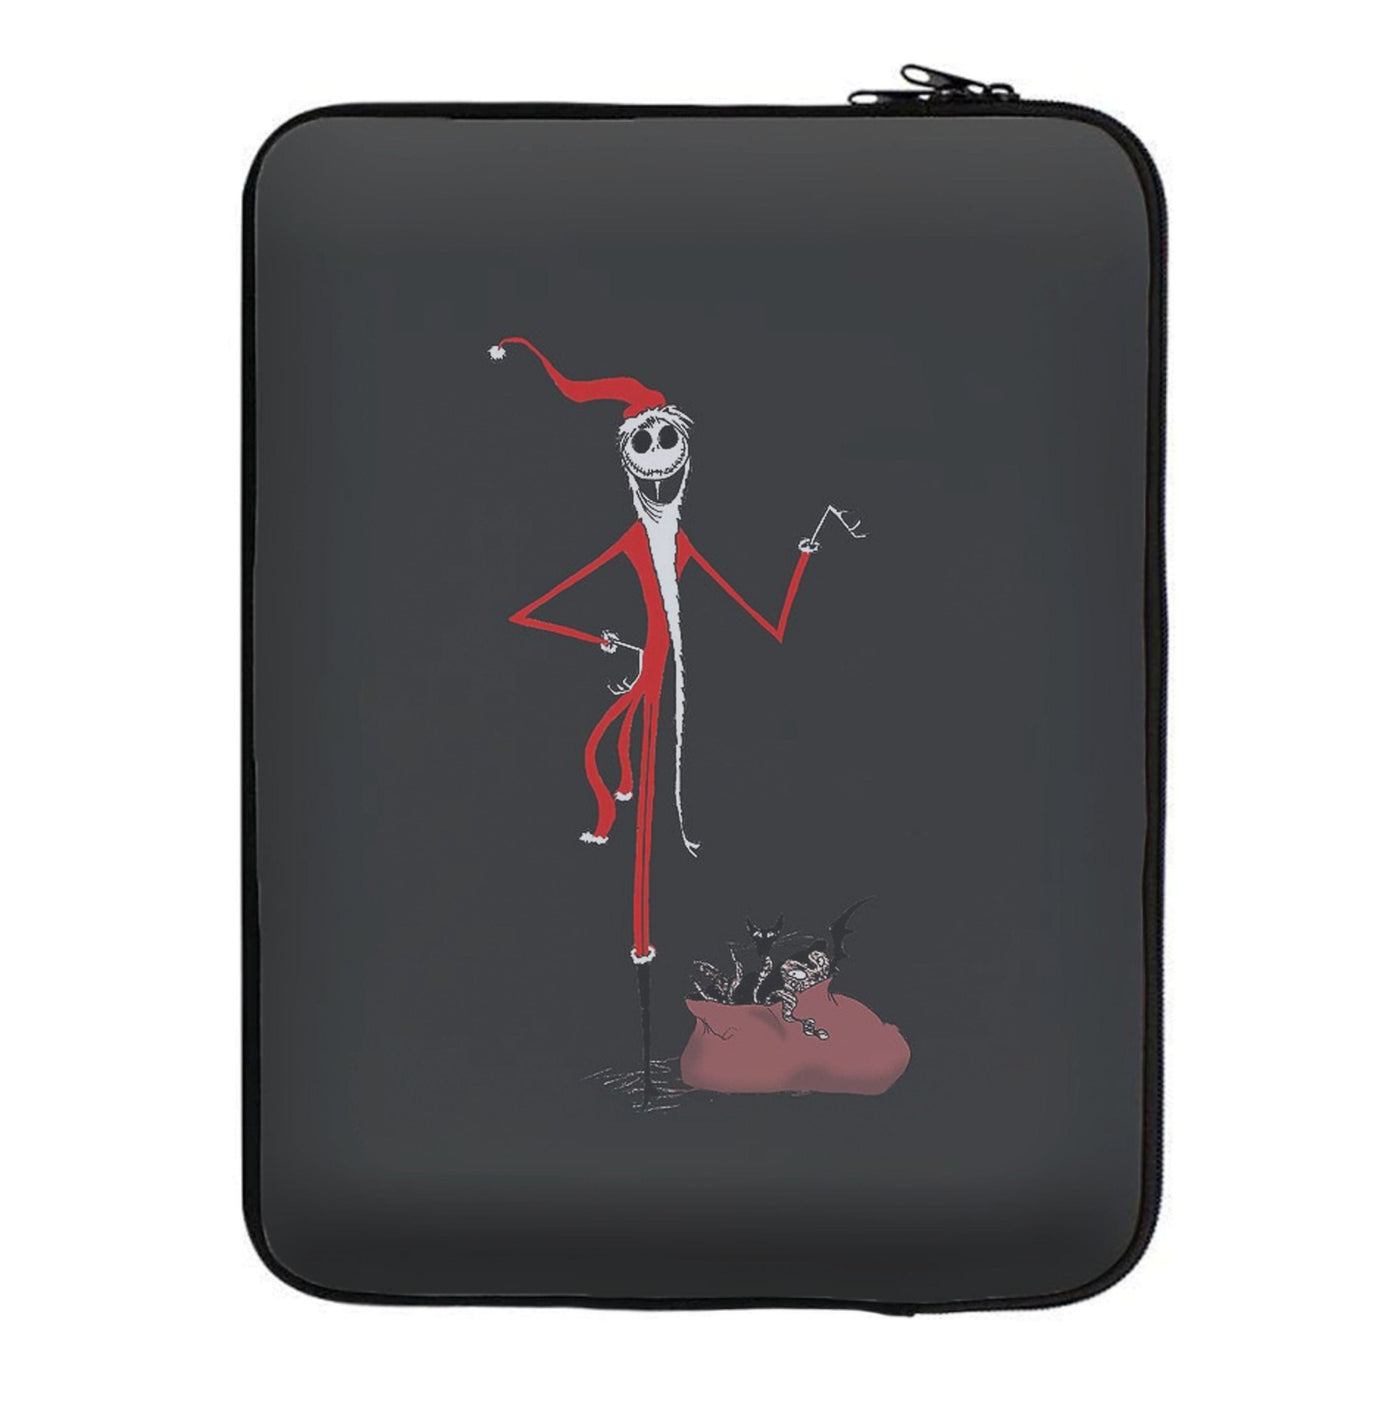 Sandy Clause - A Nightmare Before Christmas Laptop Sleeve